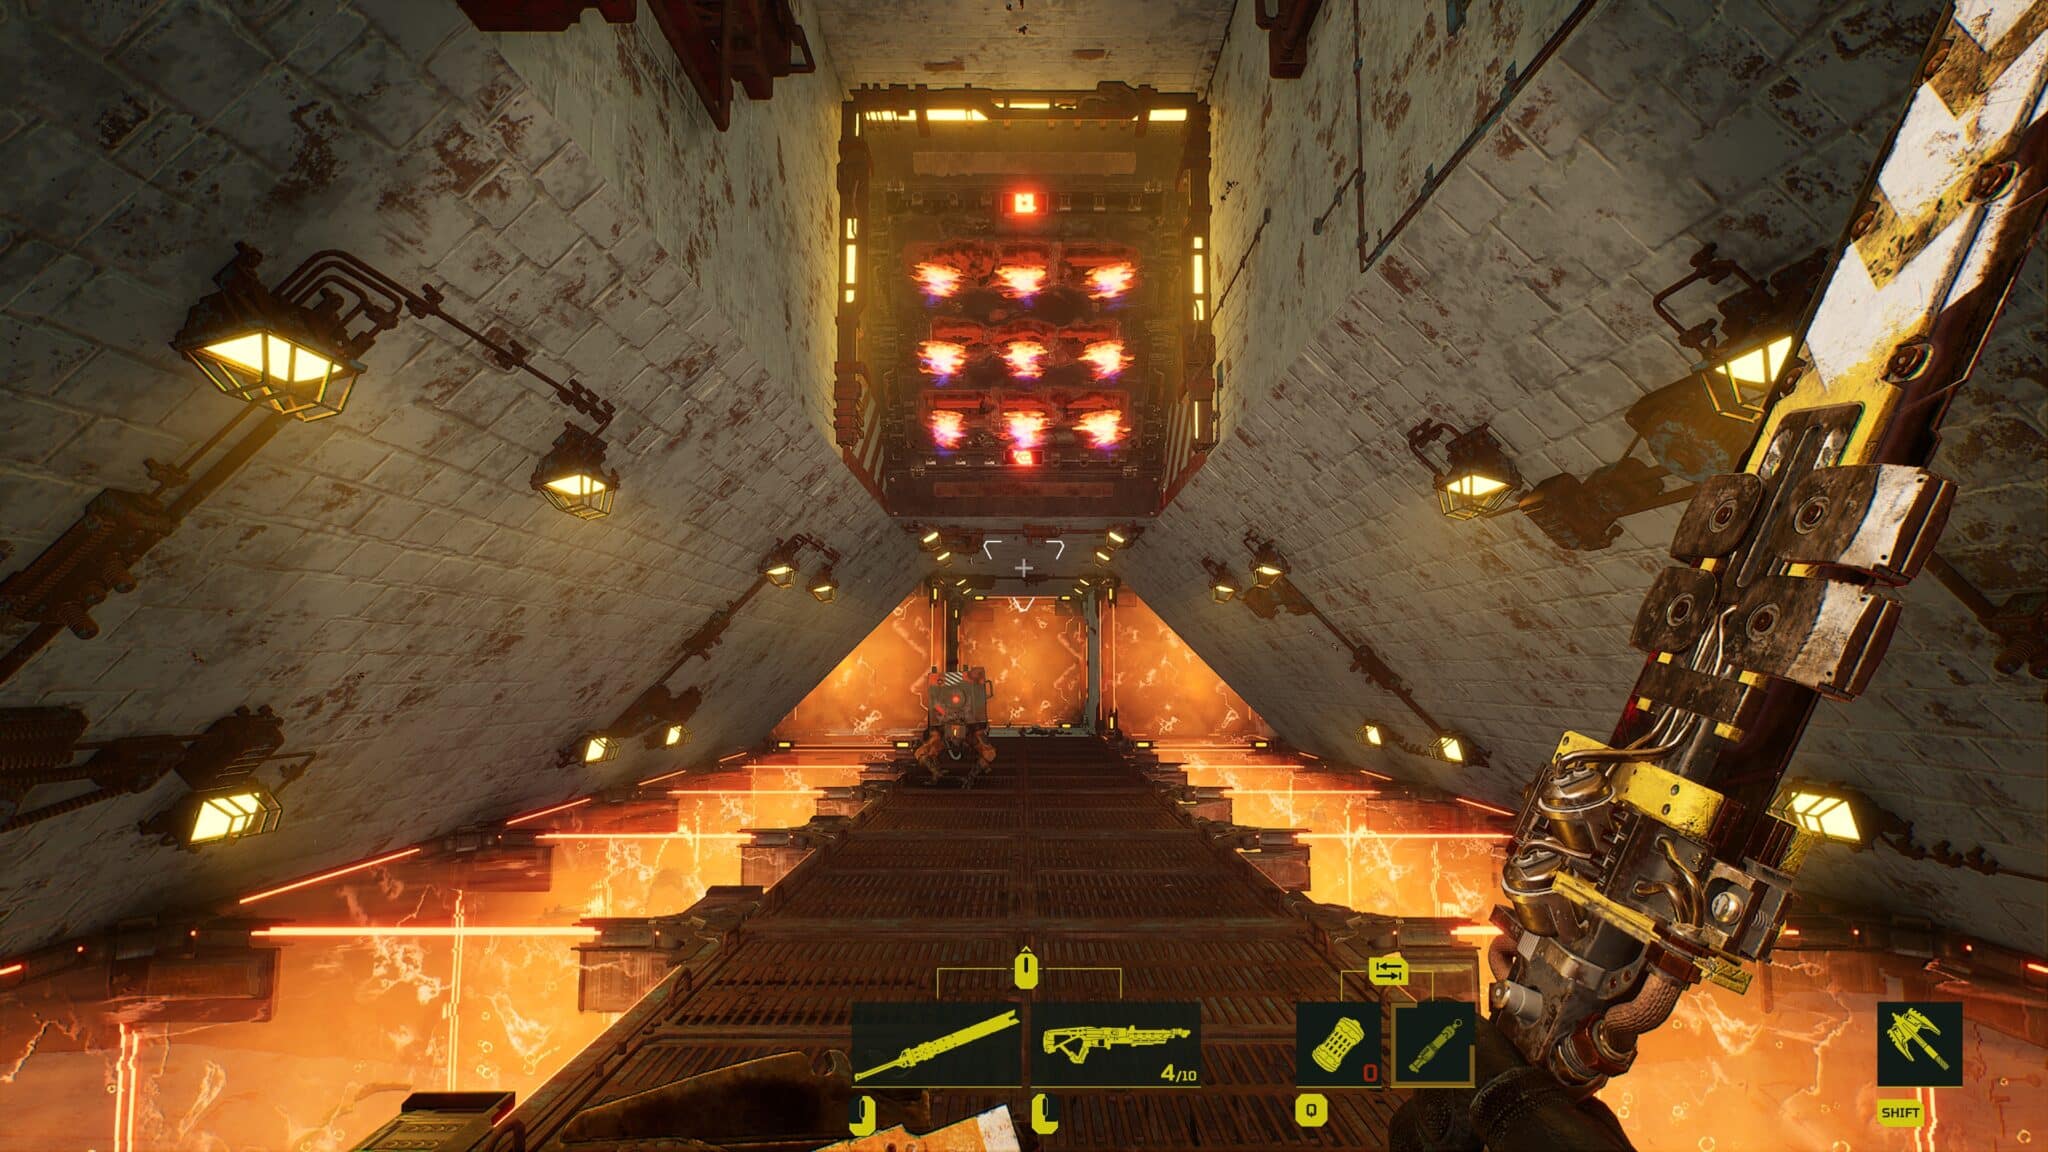 (The orange plasma blocks can also be used as a deadly chasm.)